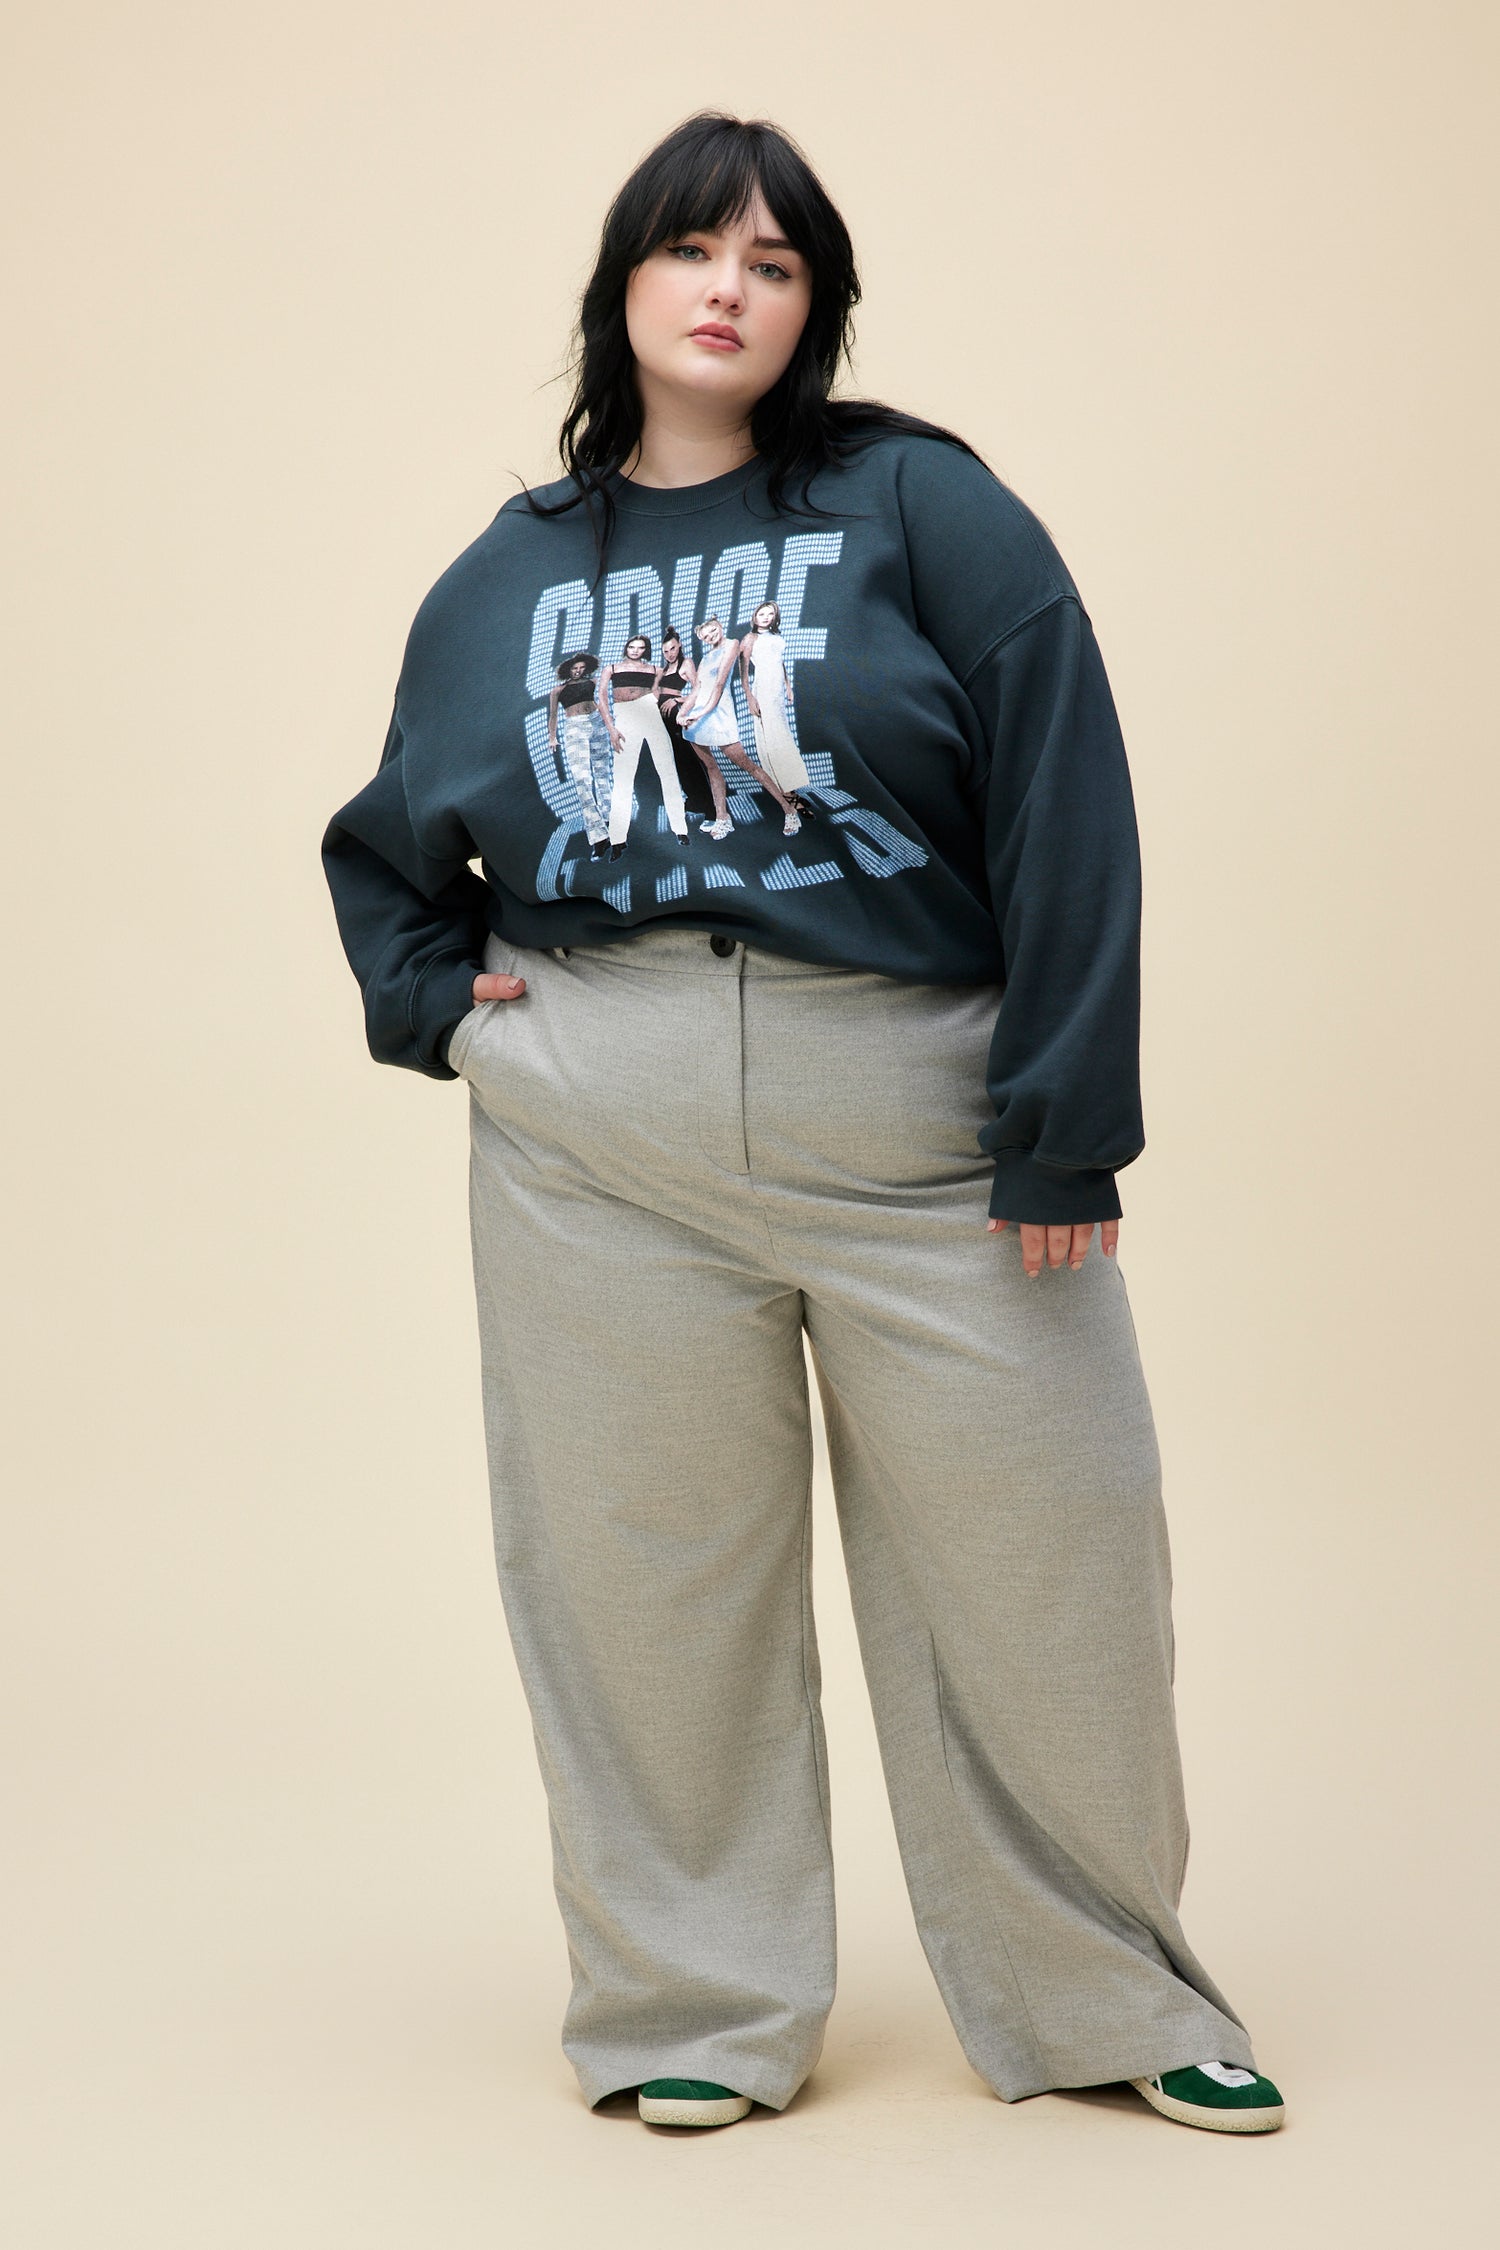 A  plus size model wearing black sweatshirt featuring a large font "SPICE GIRLS" and a portrait of the group. 